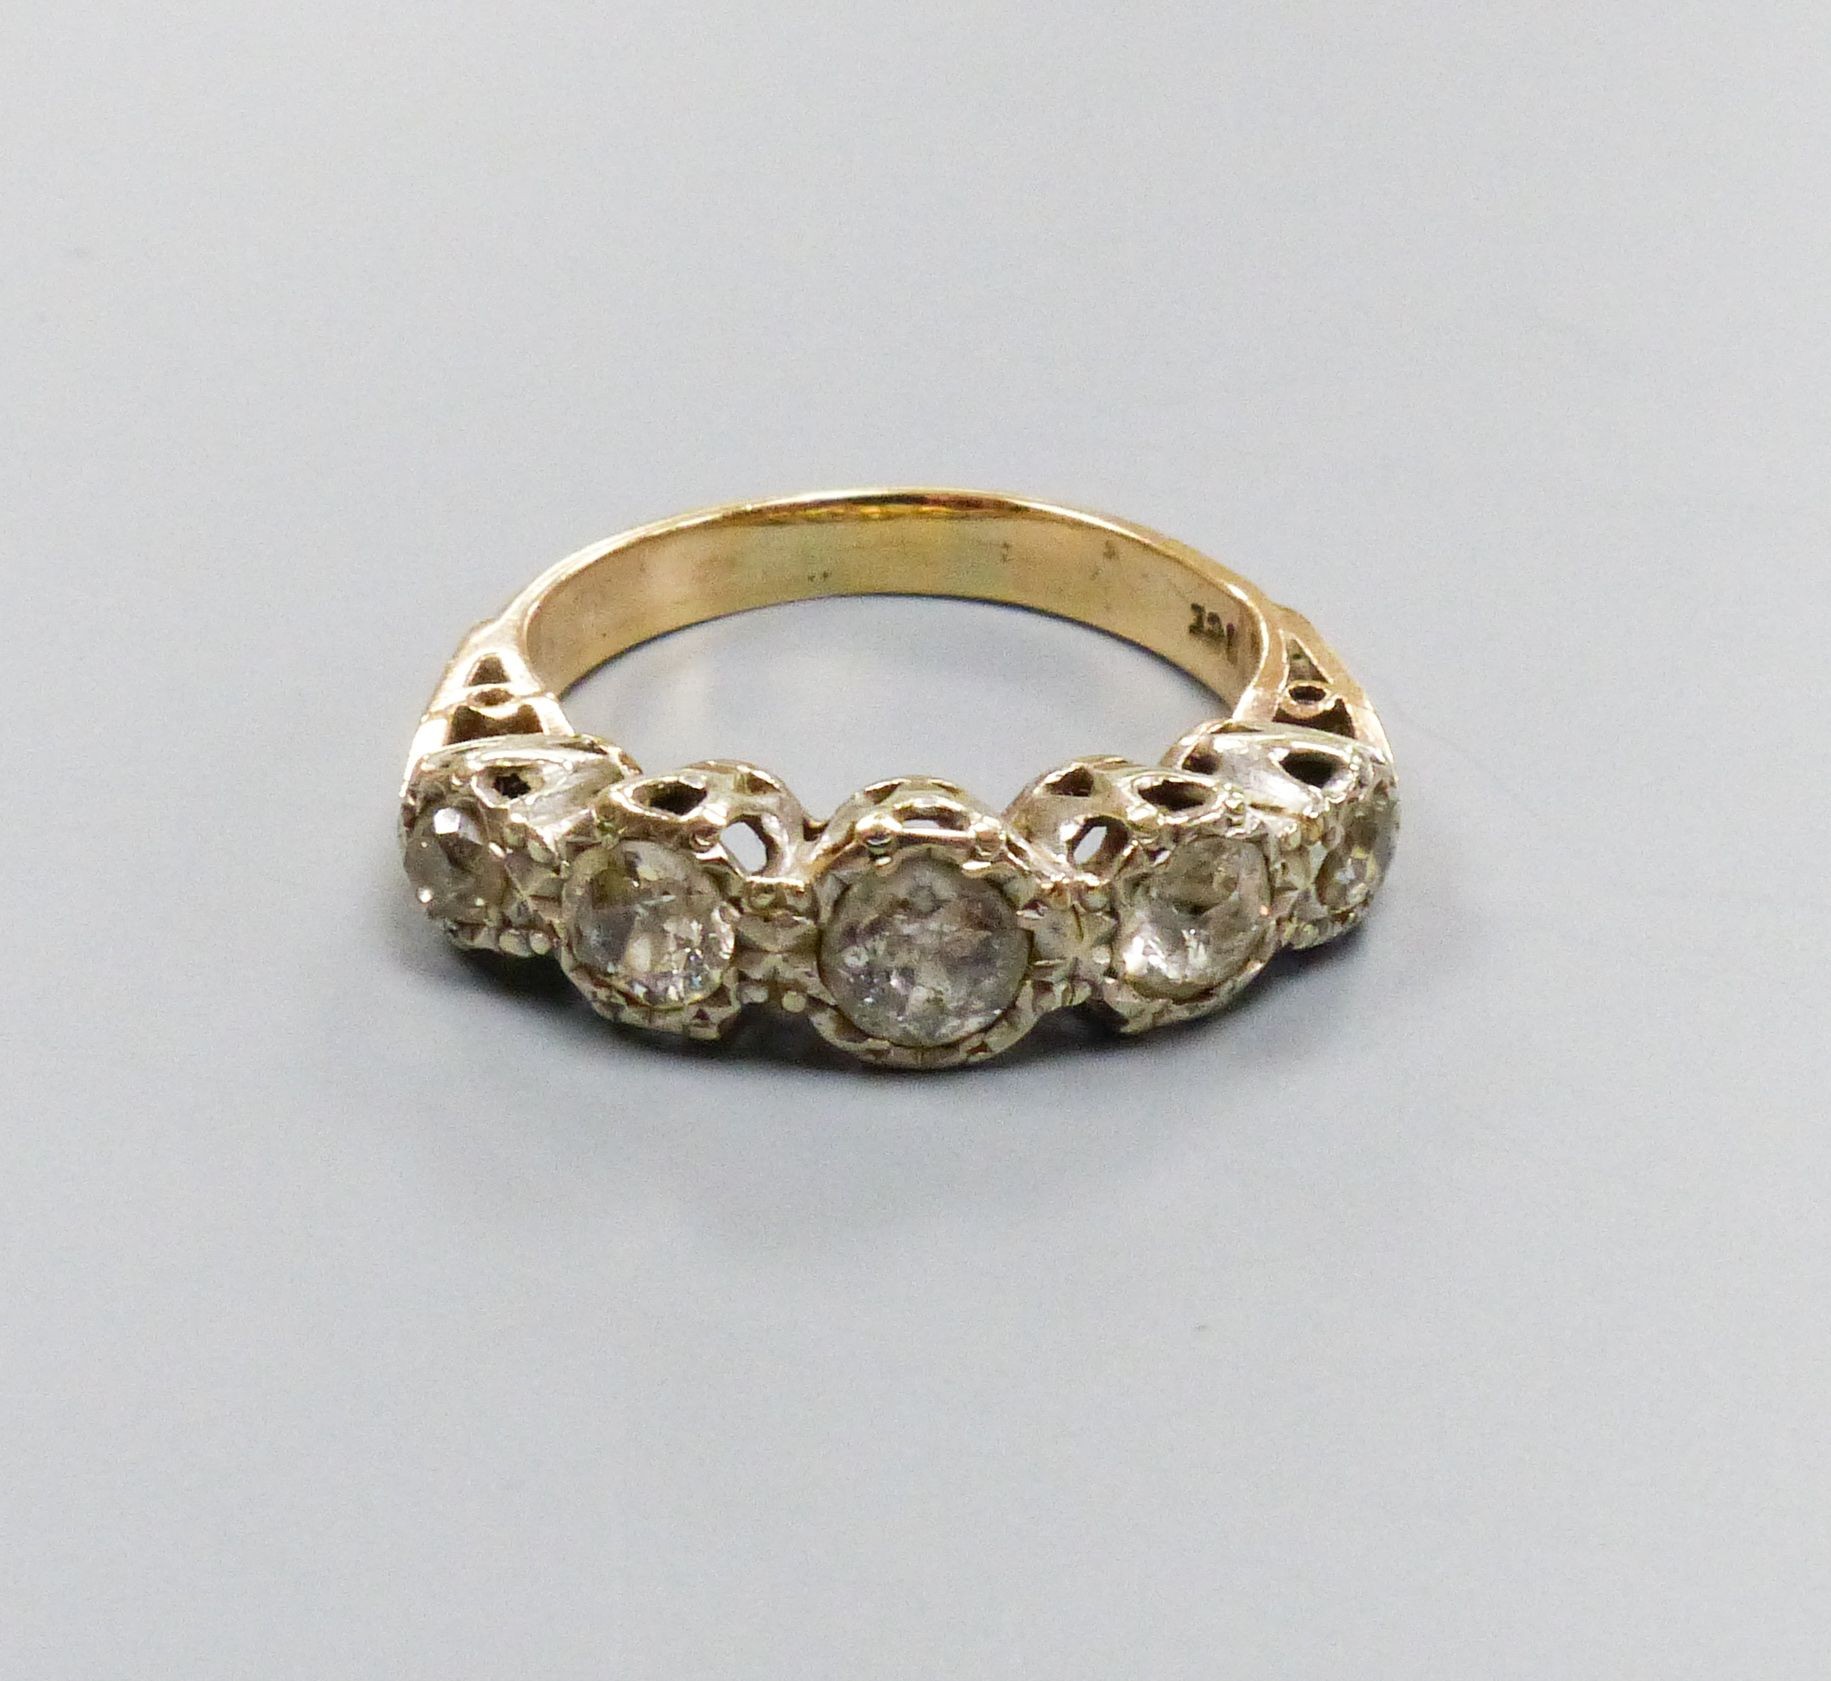 1887A five-stone diamond ring, 9ct white and yellow gold setting, claw-set with carved shoulders, size M, gross weight 4.3 grams.